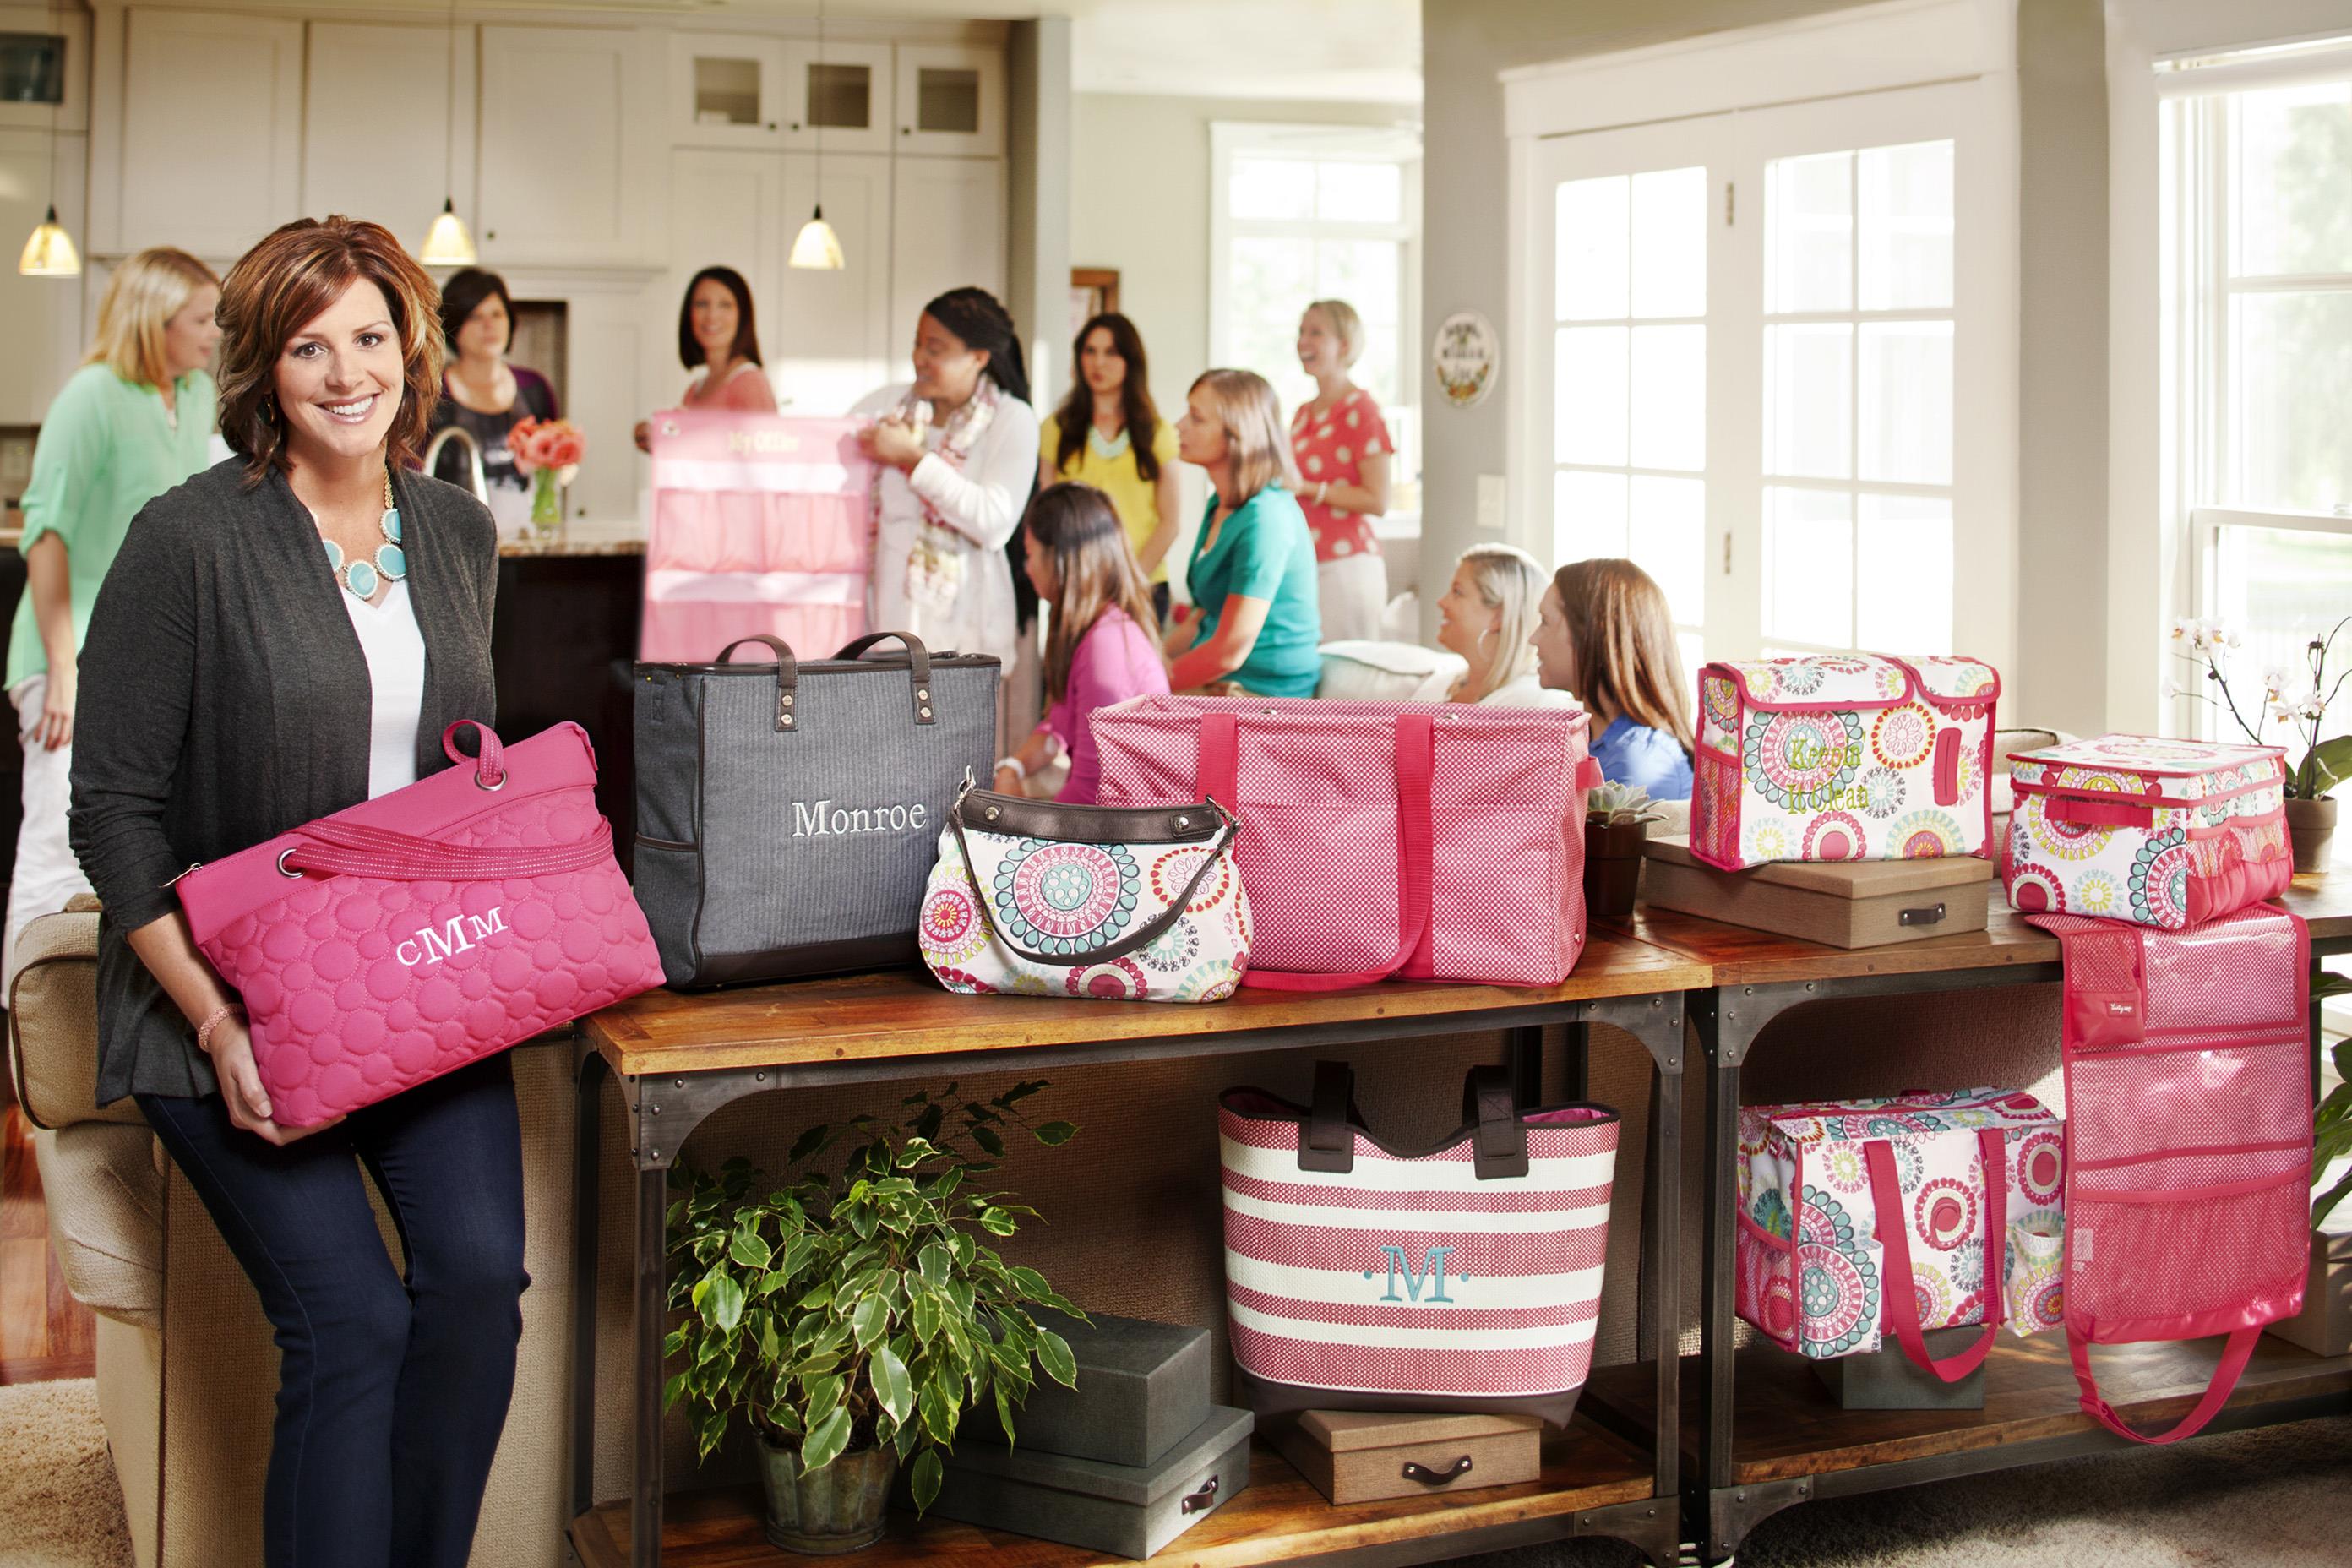 Thirty One Gifts reviews in Totes - ChickAdvisor